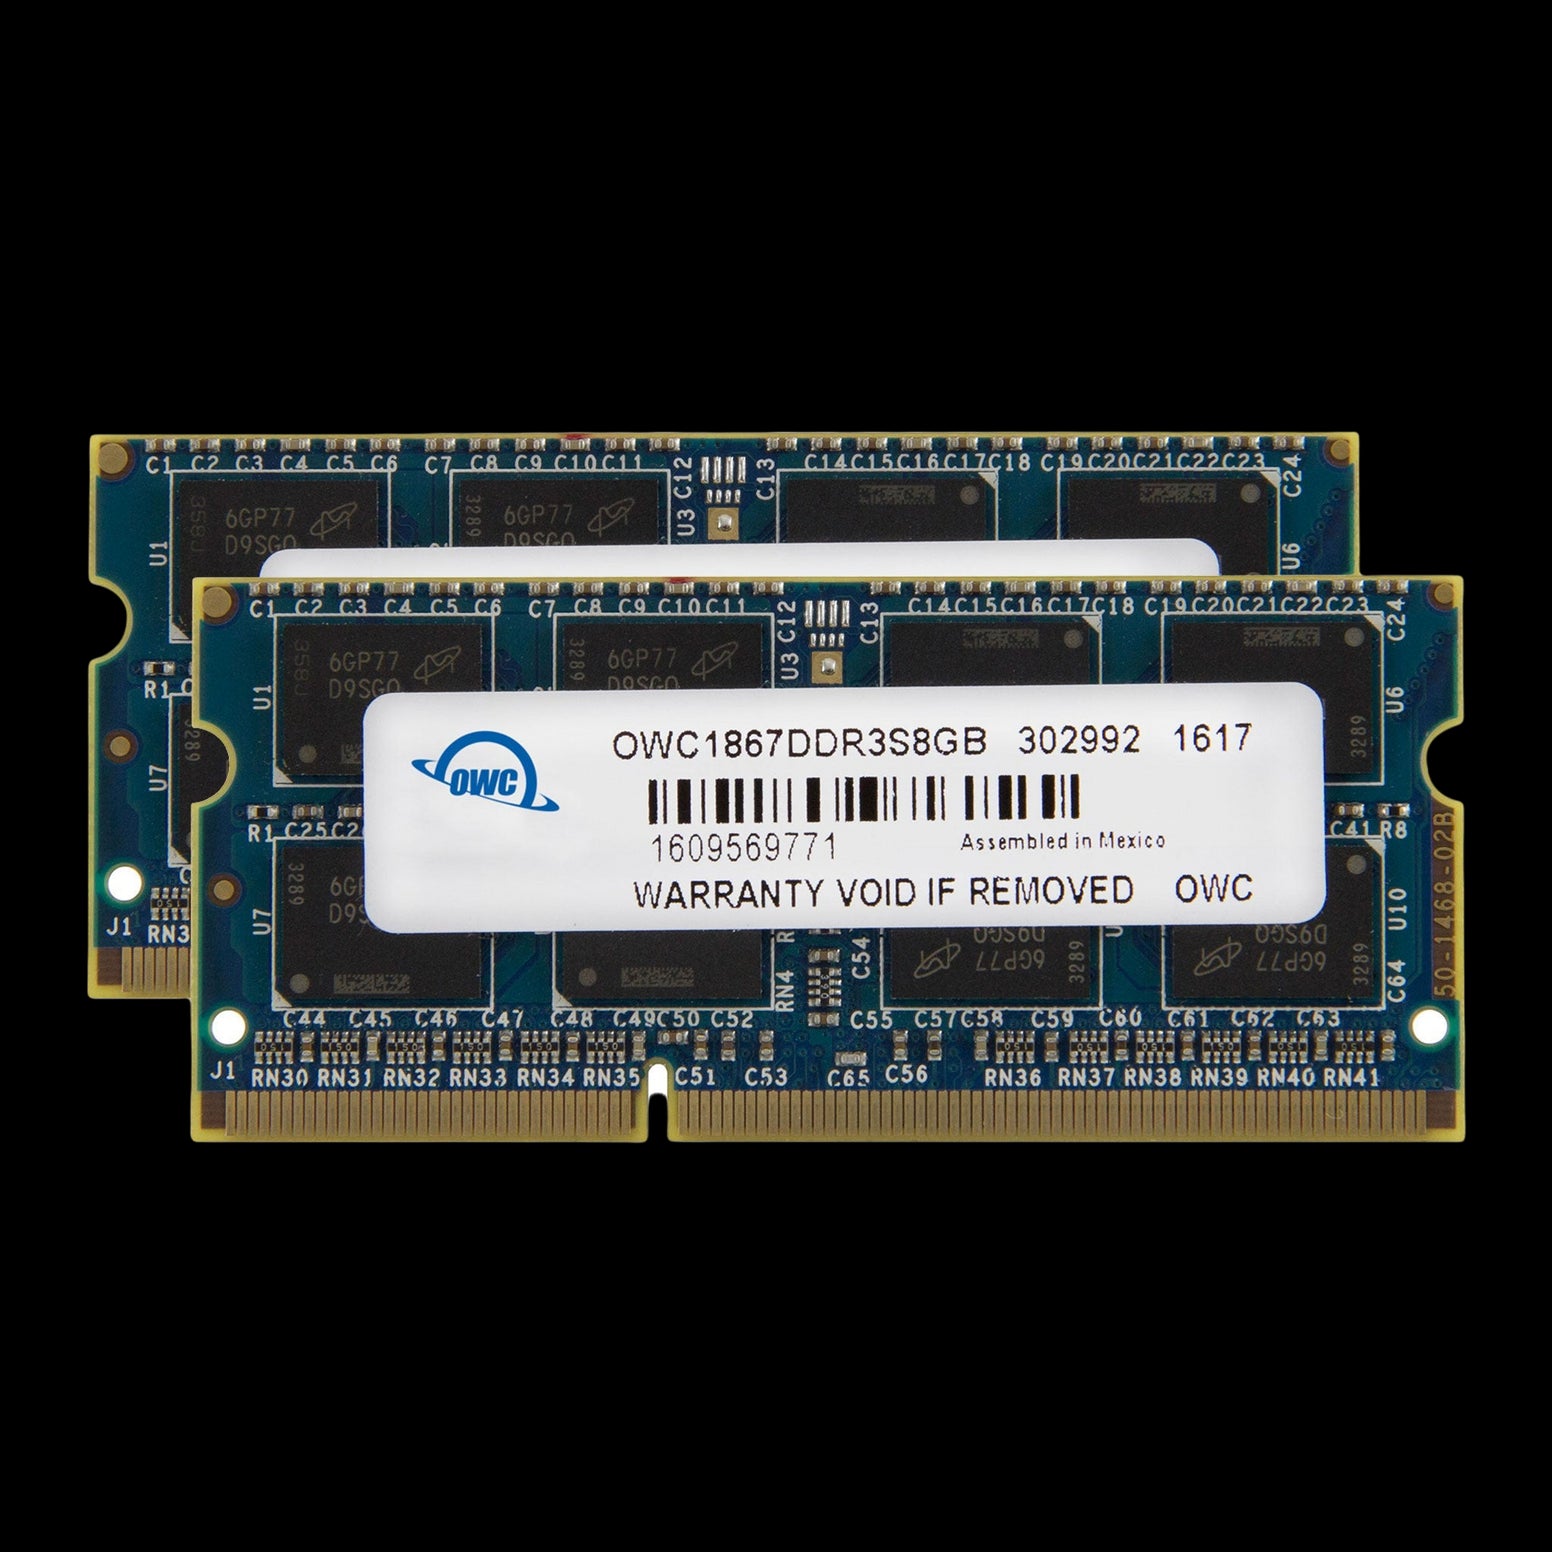 8GB OWC Matched Memory Upgrade Kit (2 x 4GB) 1867MHZ PC3-14900 DDR3 SO-DIMM